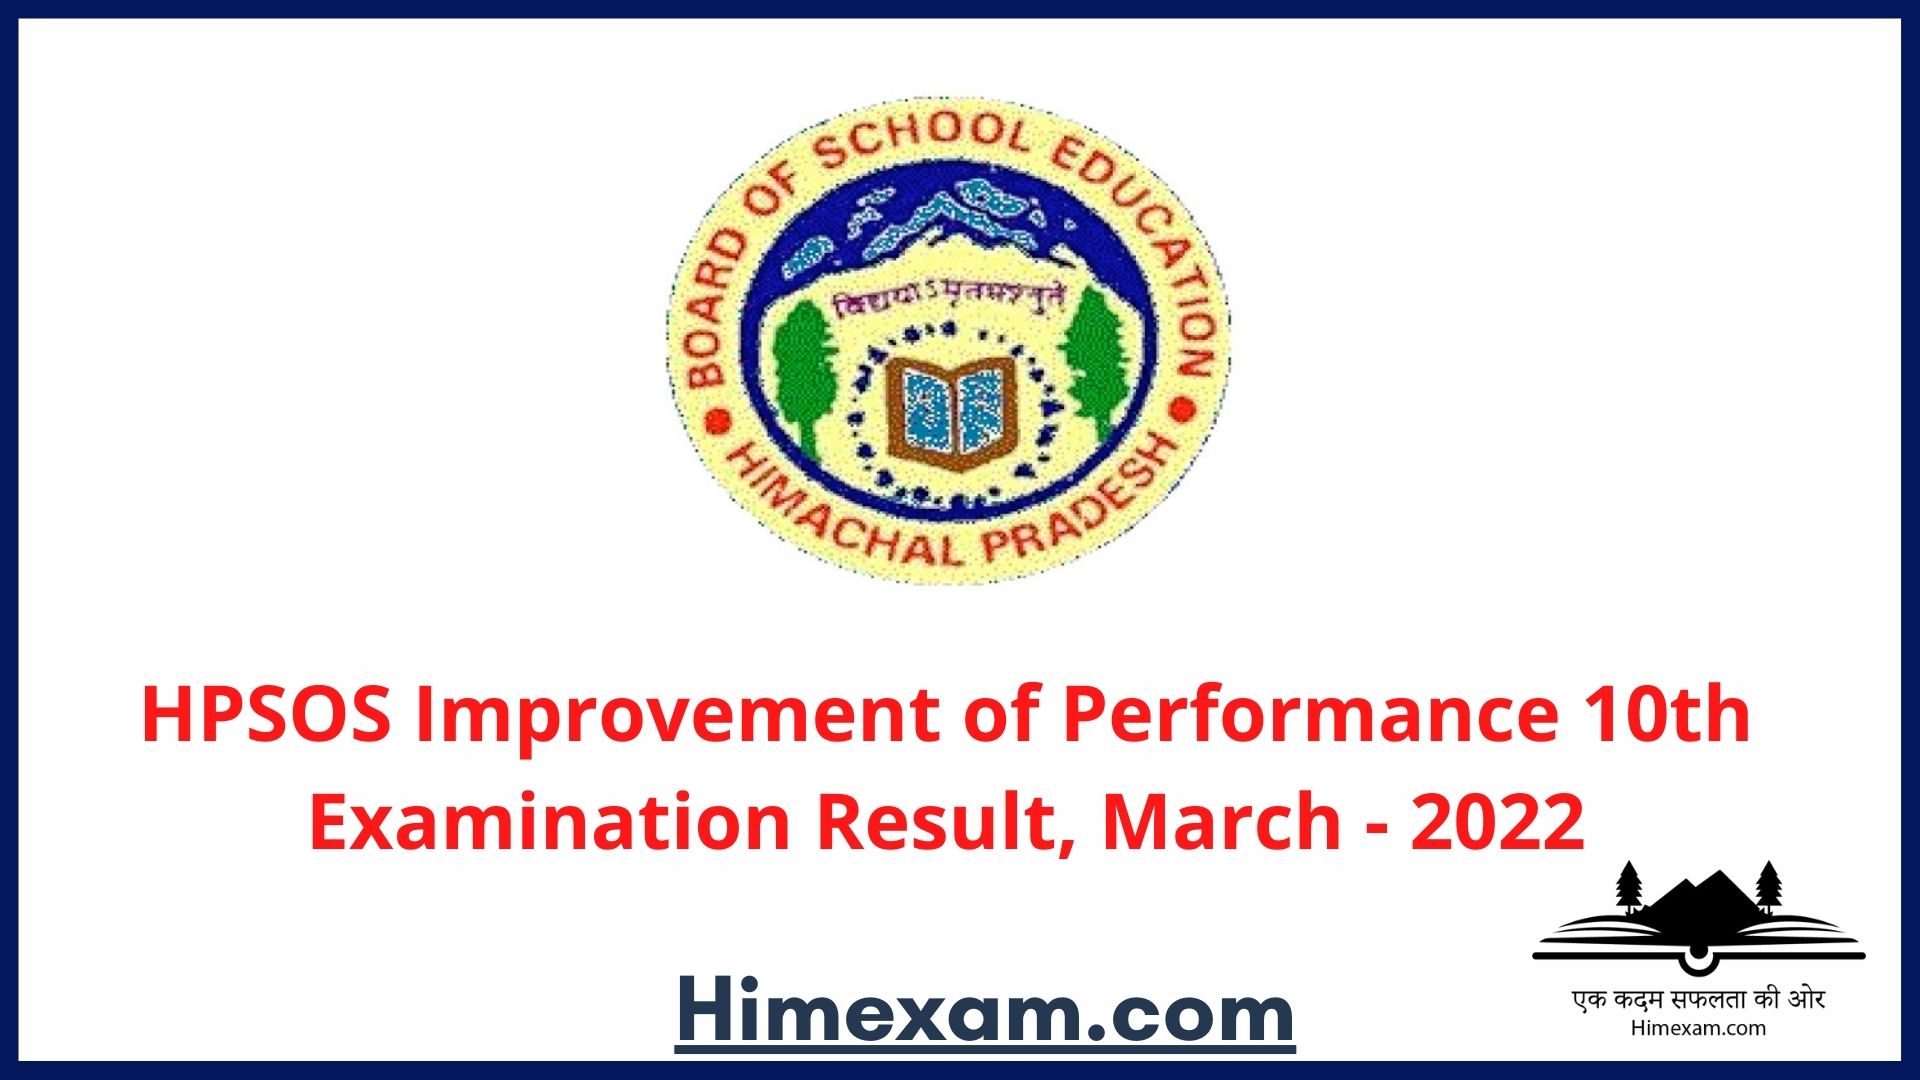 HPSOS Improvement of Performance 10th Examination Result, March - 2022